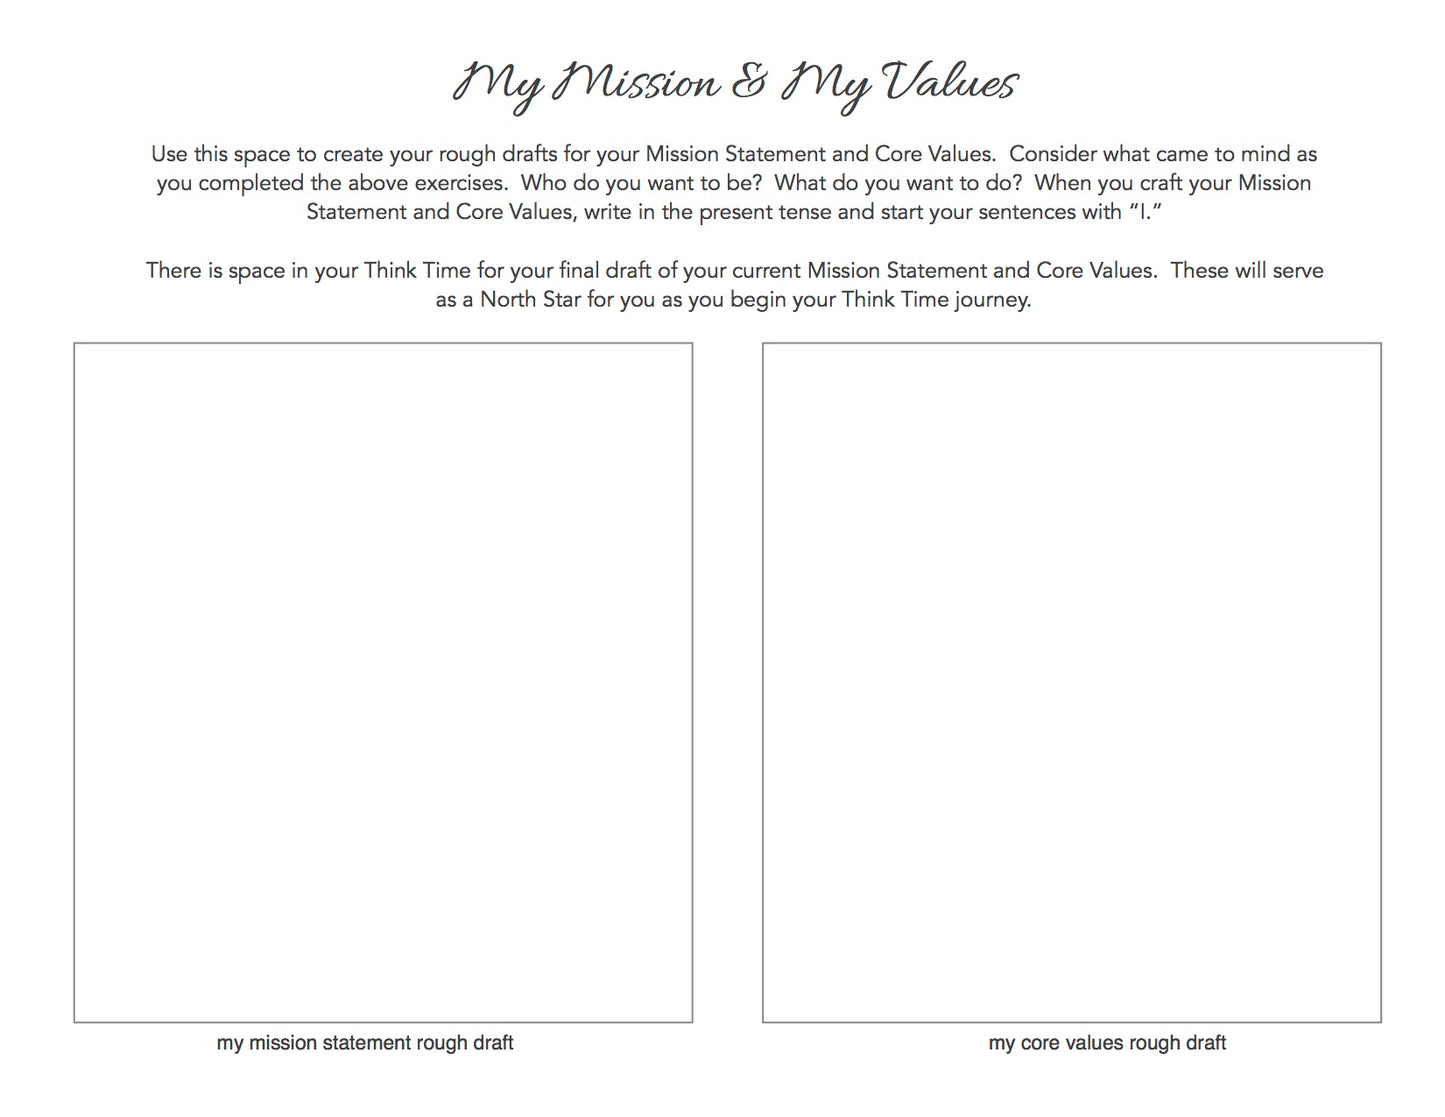 My Mission Statement and Core Values Worksheets (Download)